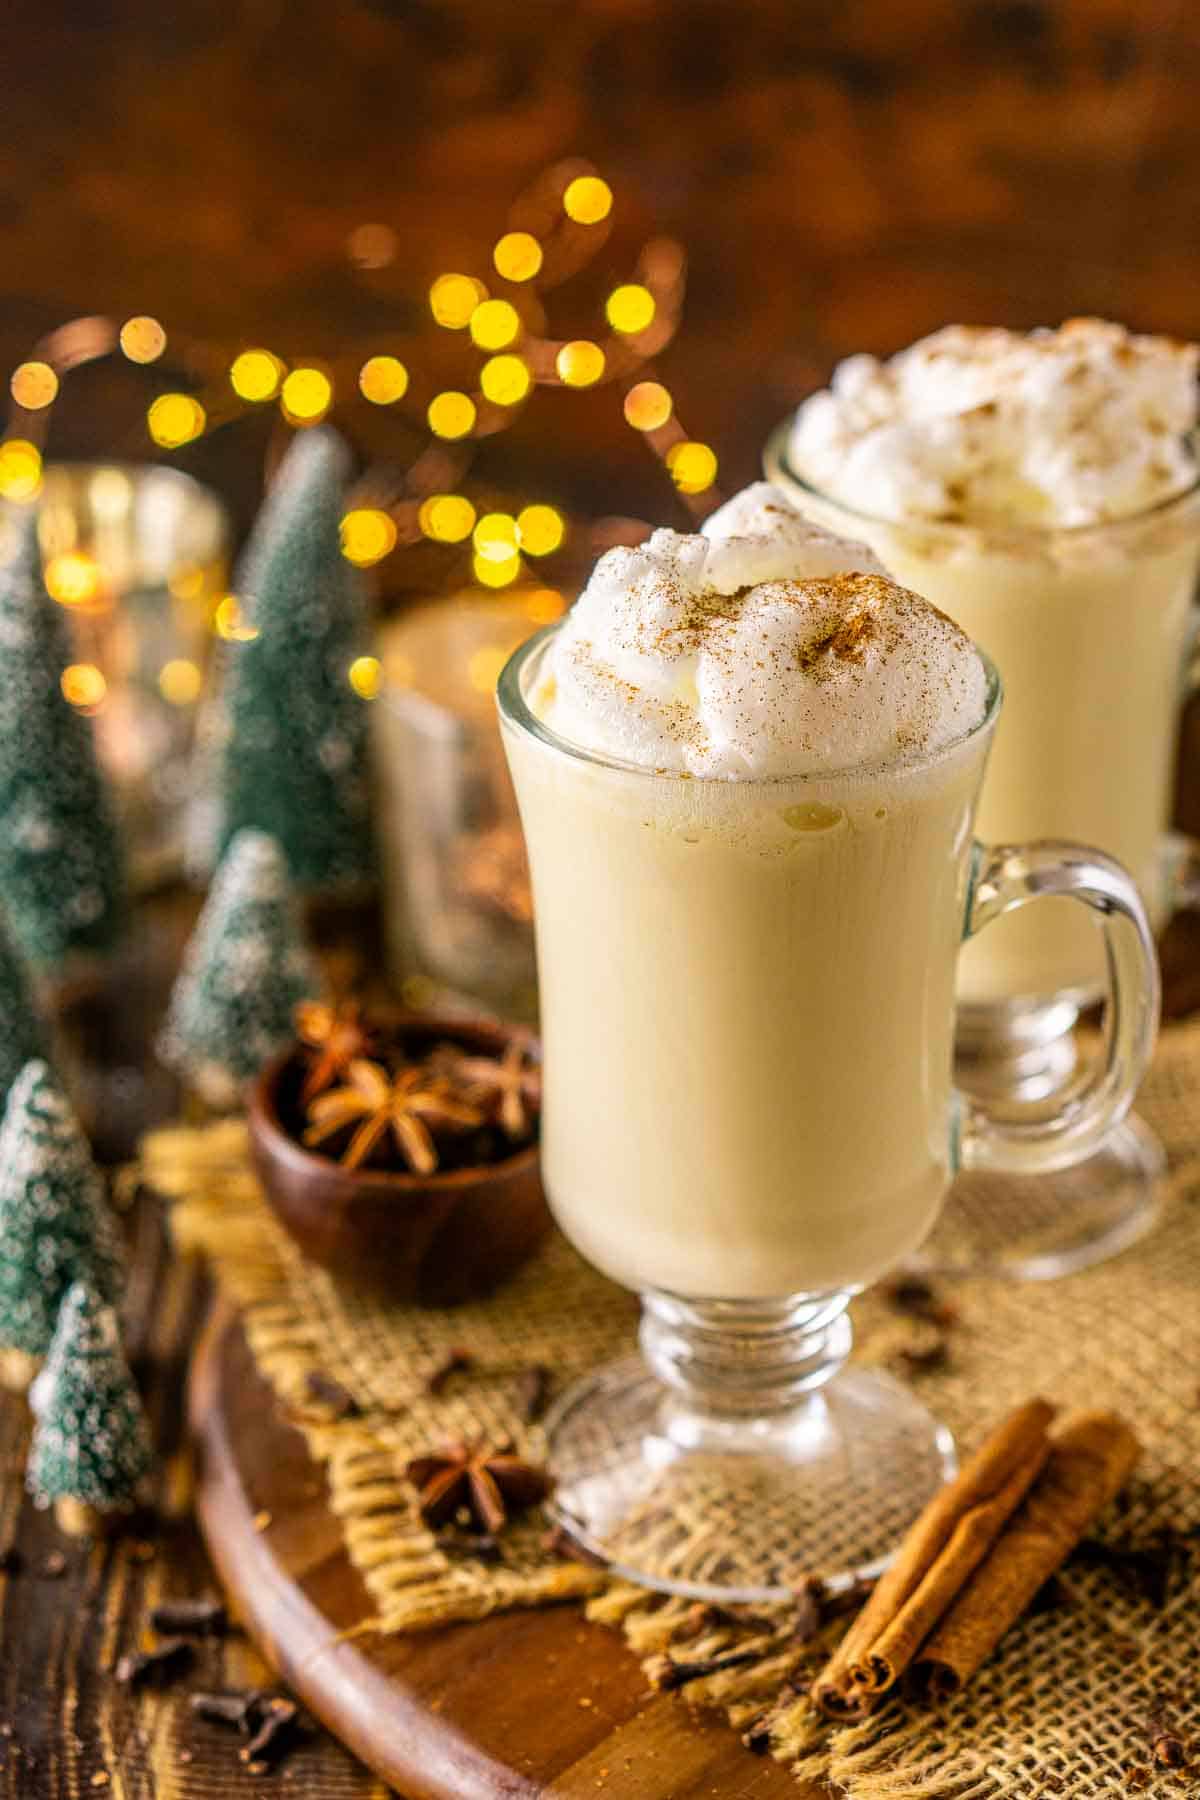 A close-up of a bourbon eggnog on a wooden platter with mini Christmas trees to the left and a bundle of cinnamon sticks to the right.